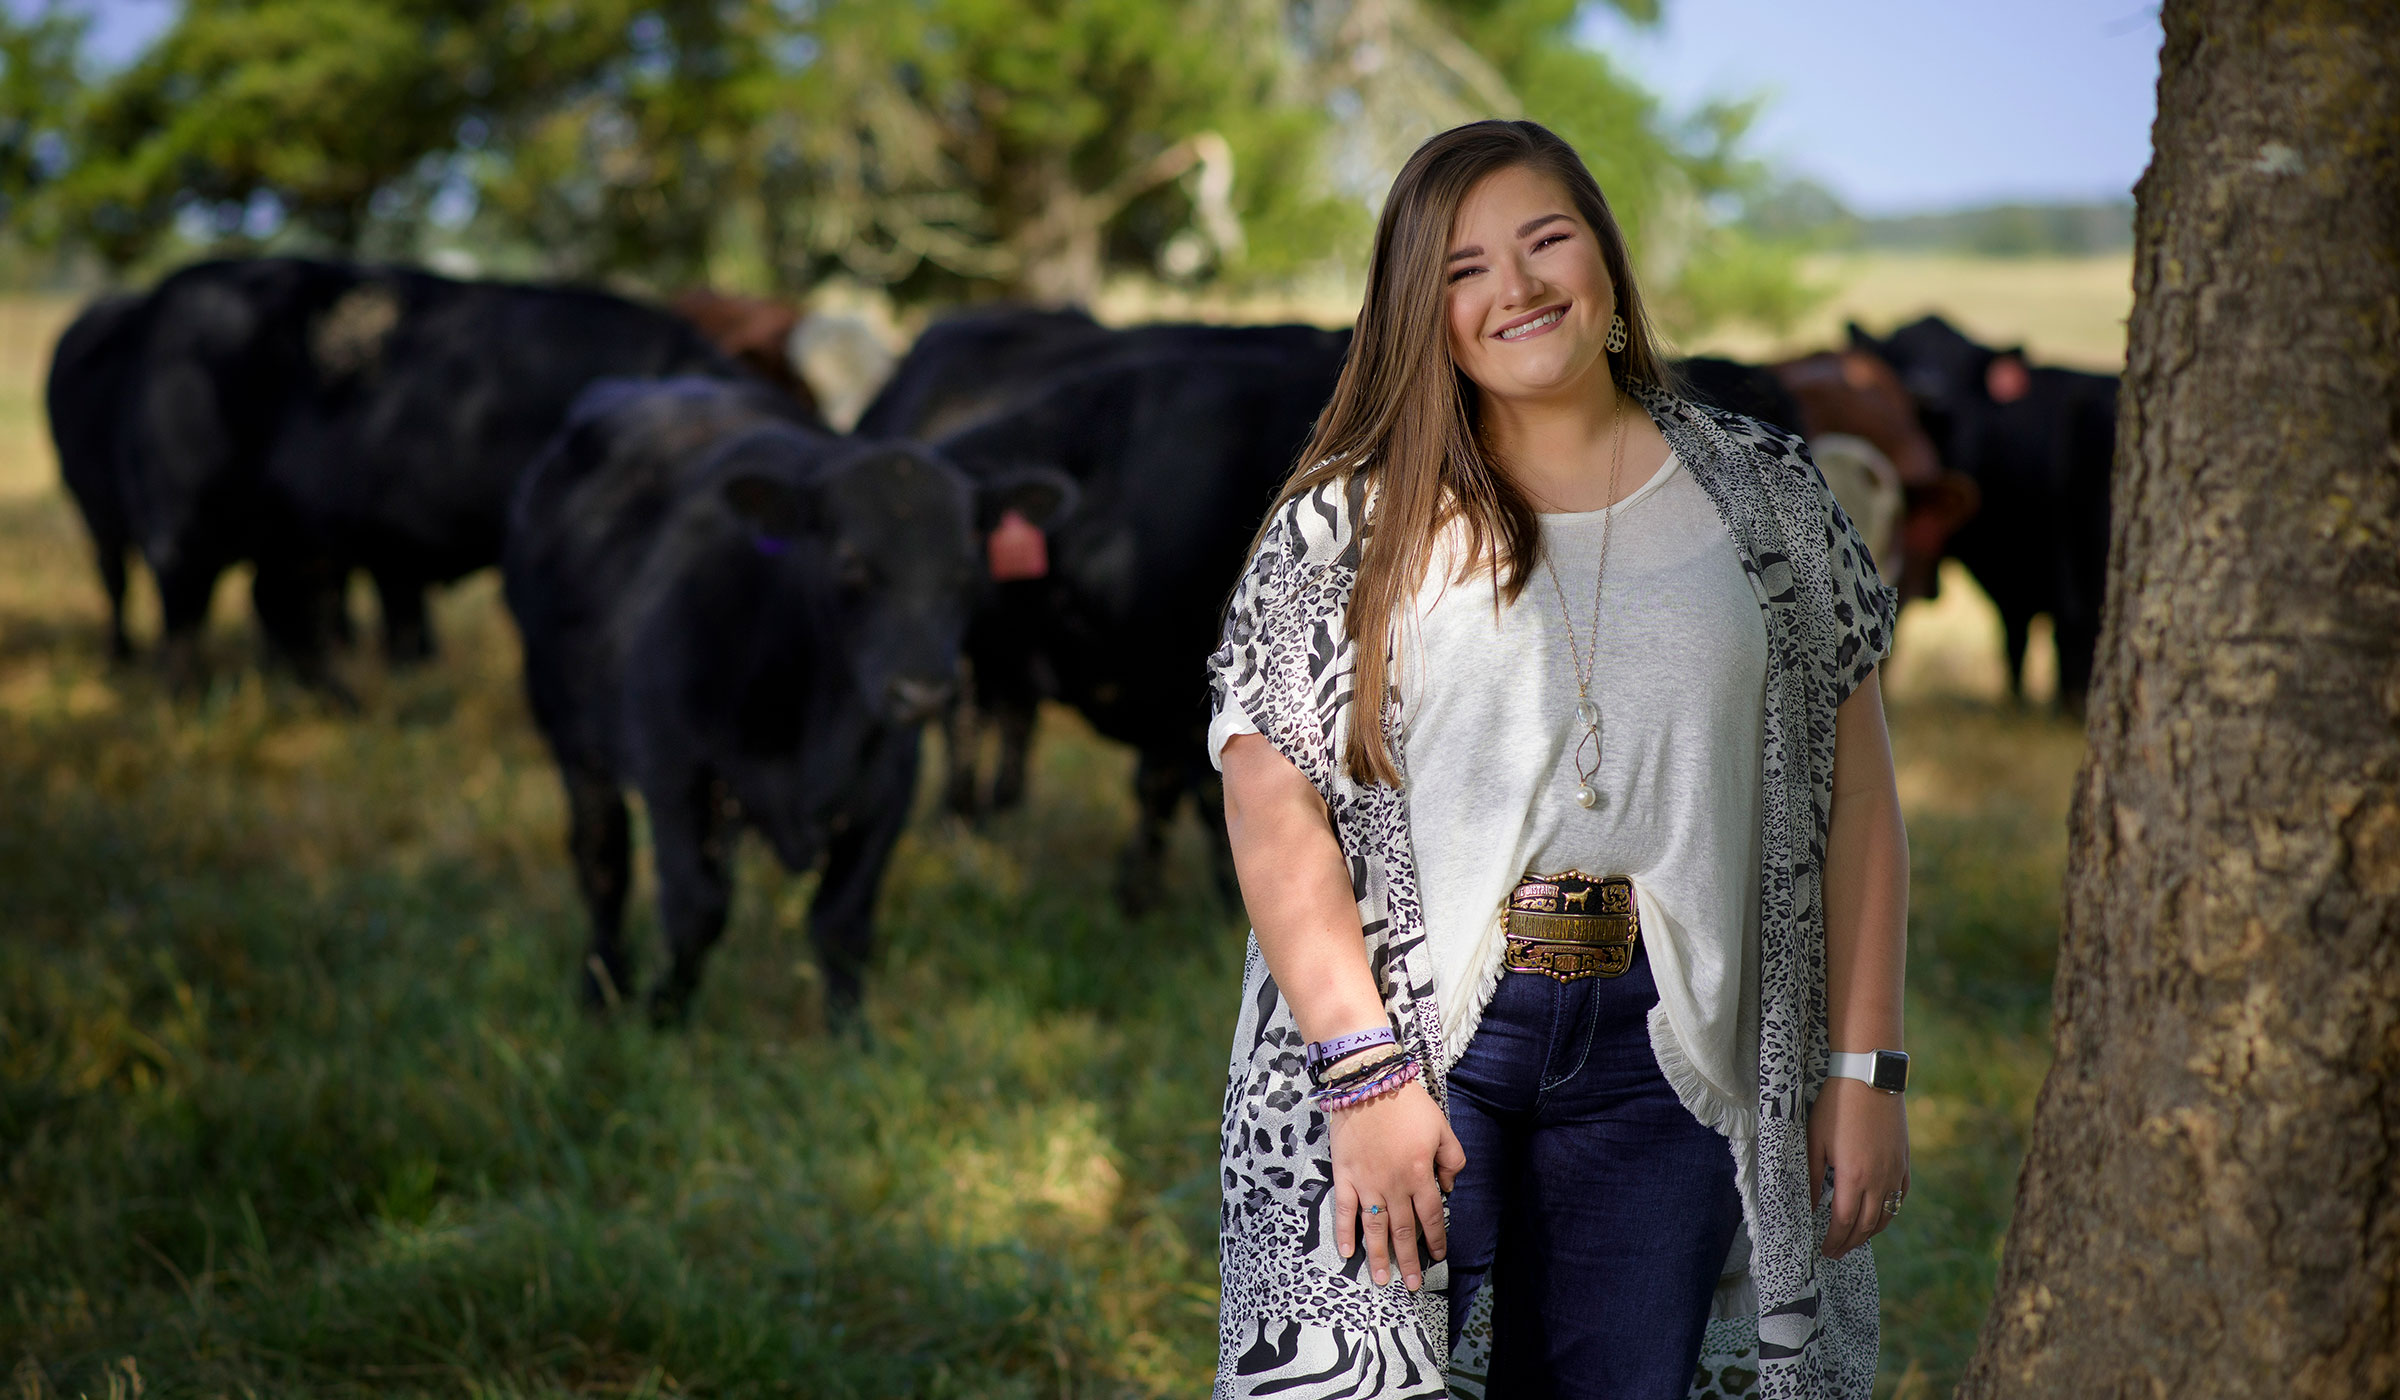 Mikayla Shelton stands outside with black cattle in the background